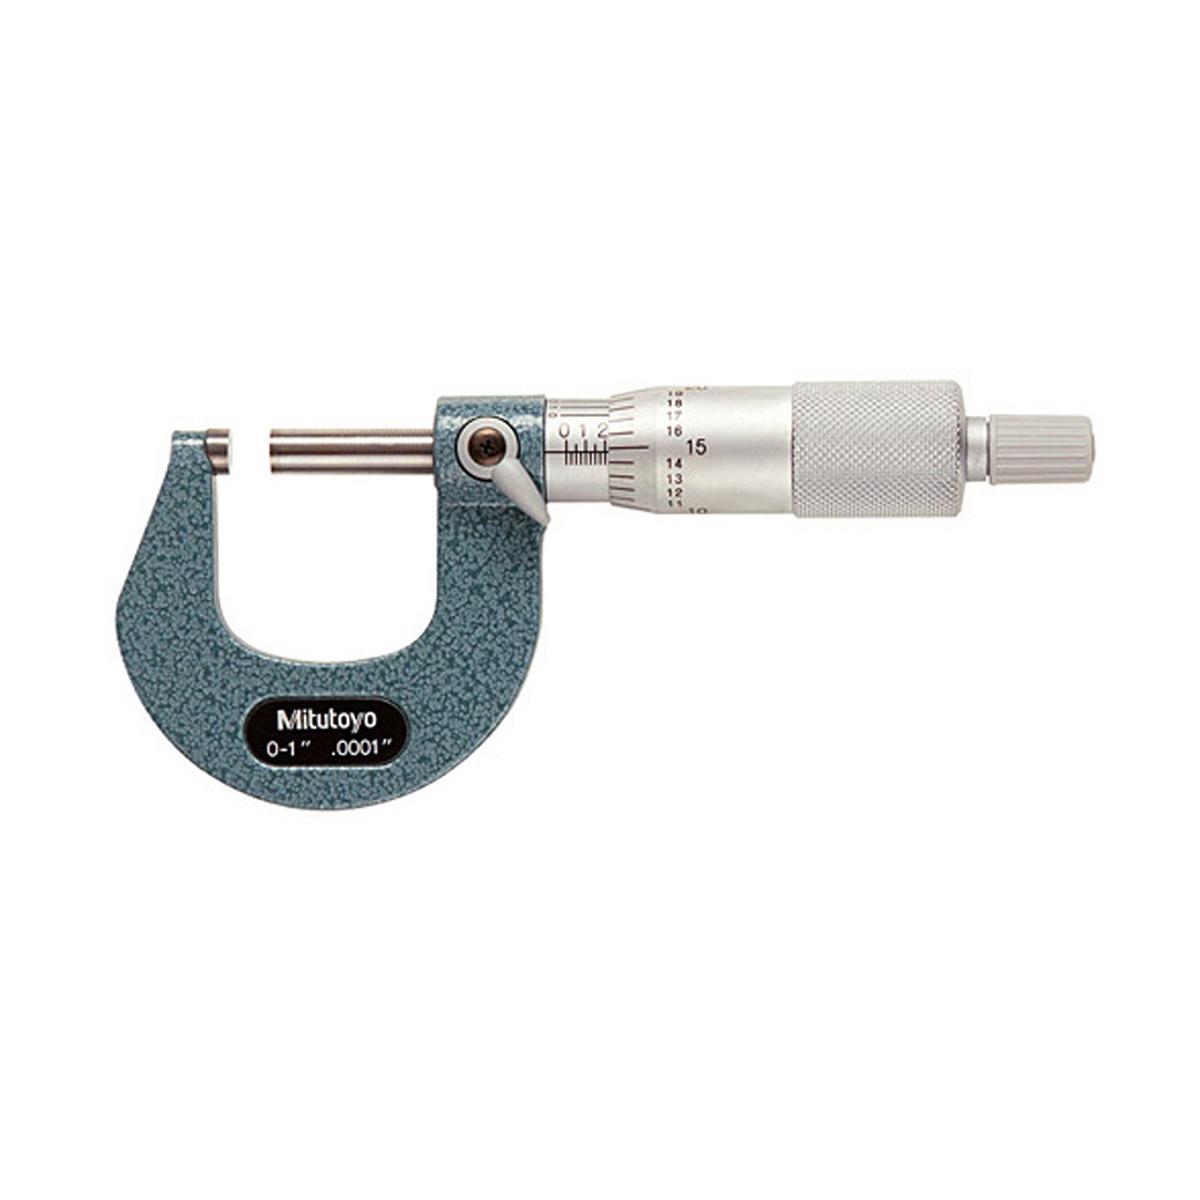 0-1" MITUTOYO OUTSIDE MICROMETER 103-260  .0001 NEW RATCHET STOP TYPE 